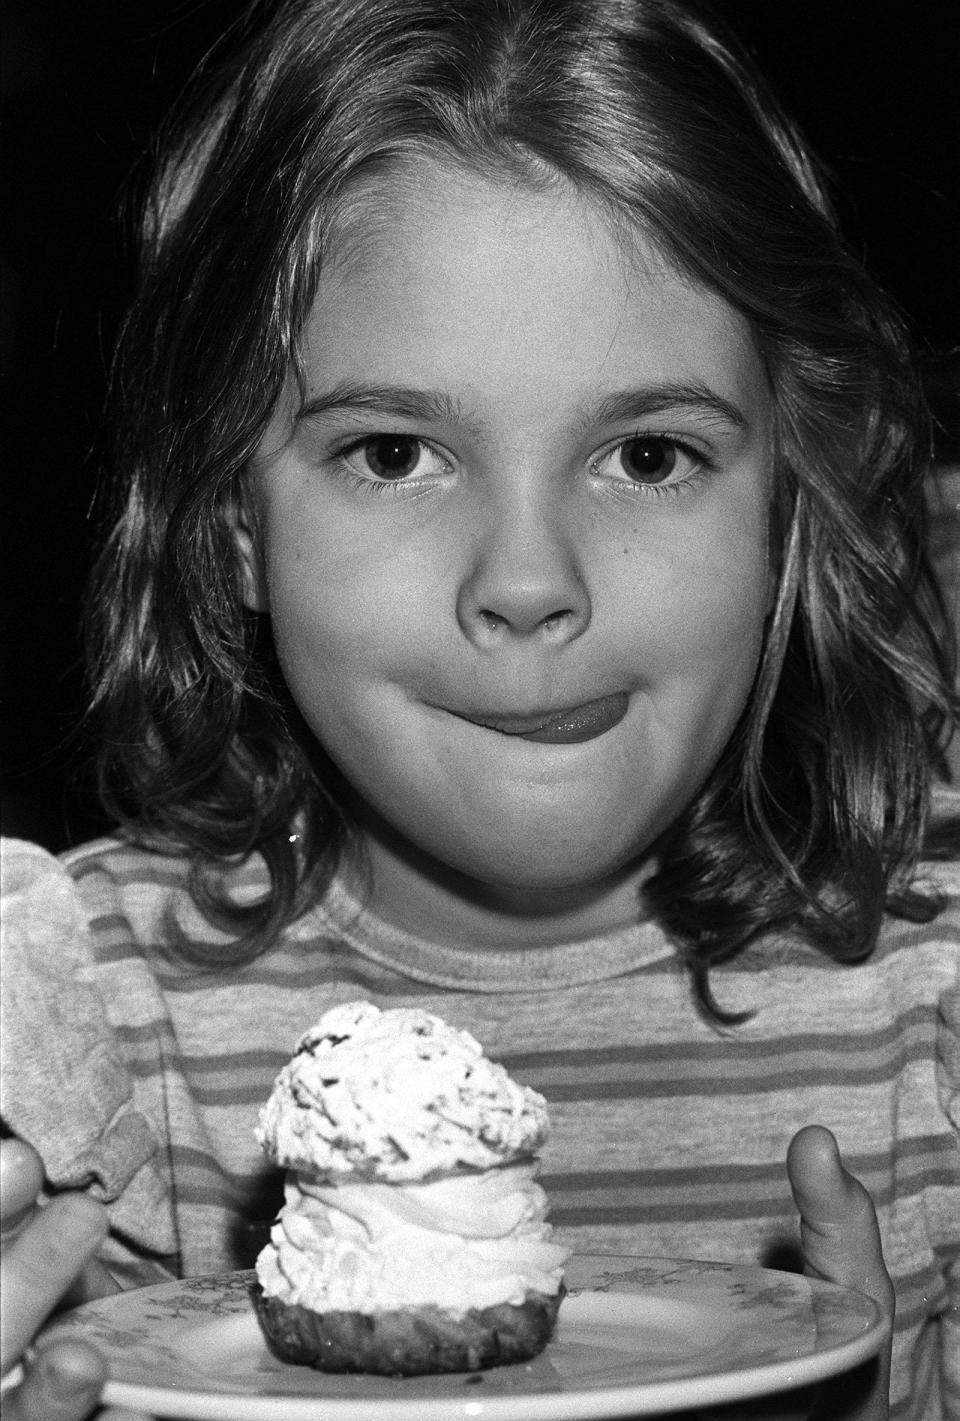 Seven year old American actress Drew Barrymore, star of the movie ET, about to eat an English teacake at the Inn on the Park, in London. Drew is the grand-daughter of silent movie star John Barrymore.   (Photo by PA Images via Getty Images)